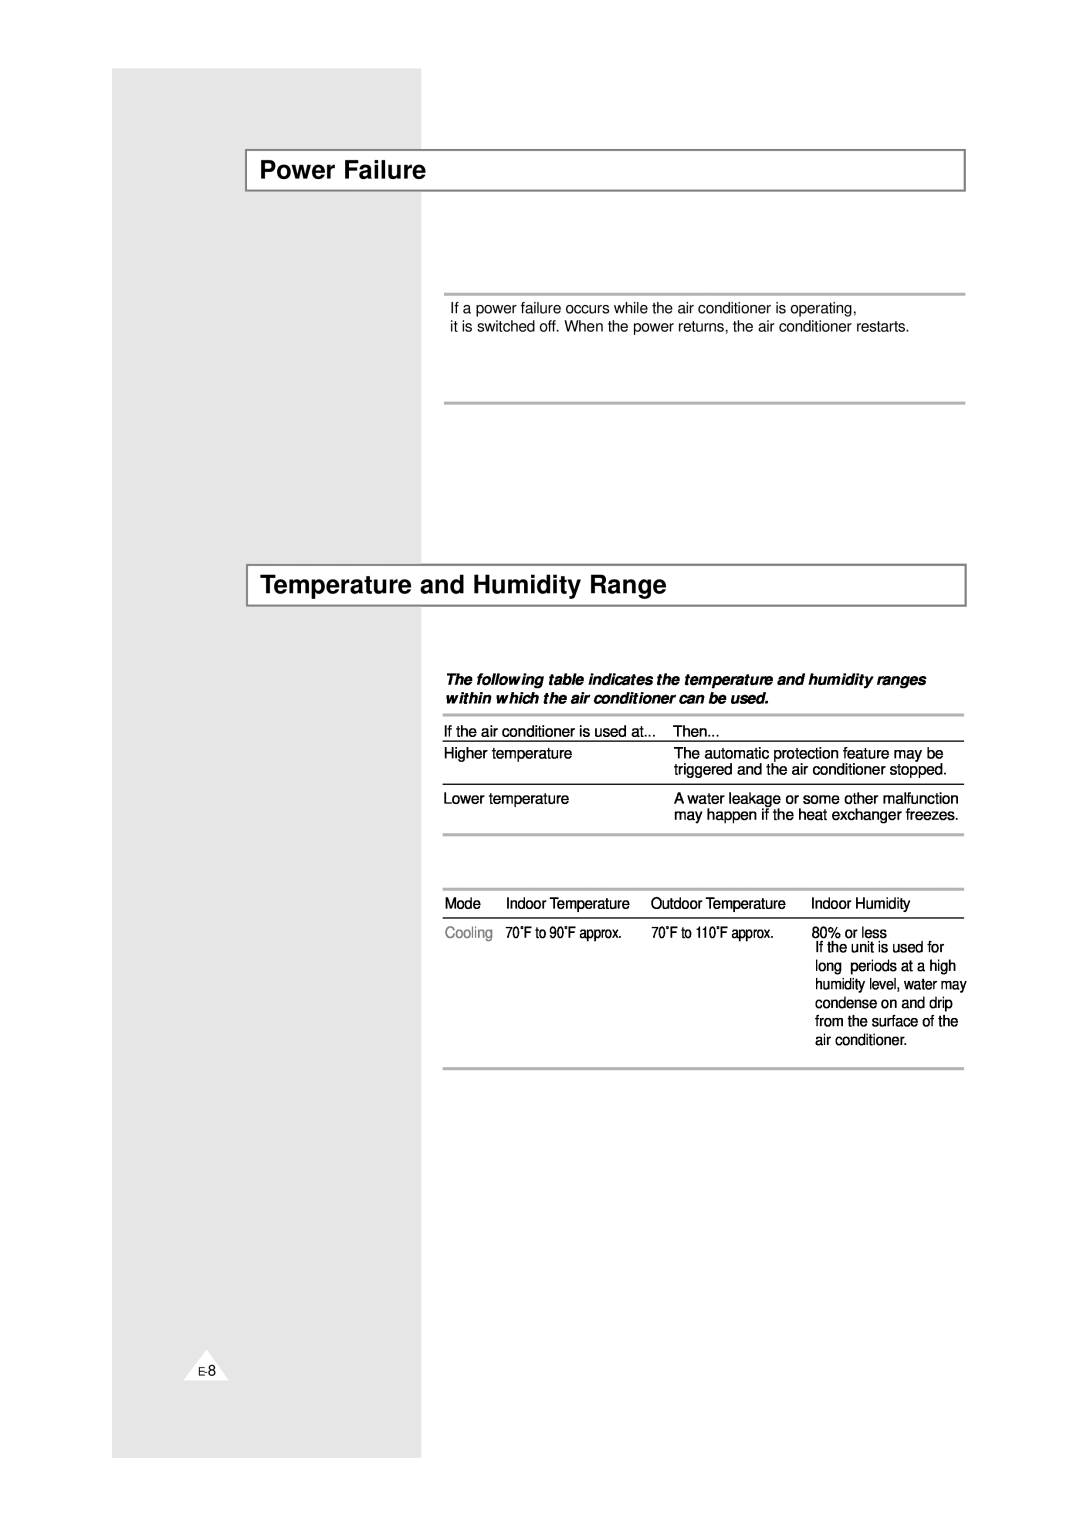 Samsung AW0529 manual Power Failure, Temperature and Humidity Range, Cooling 